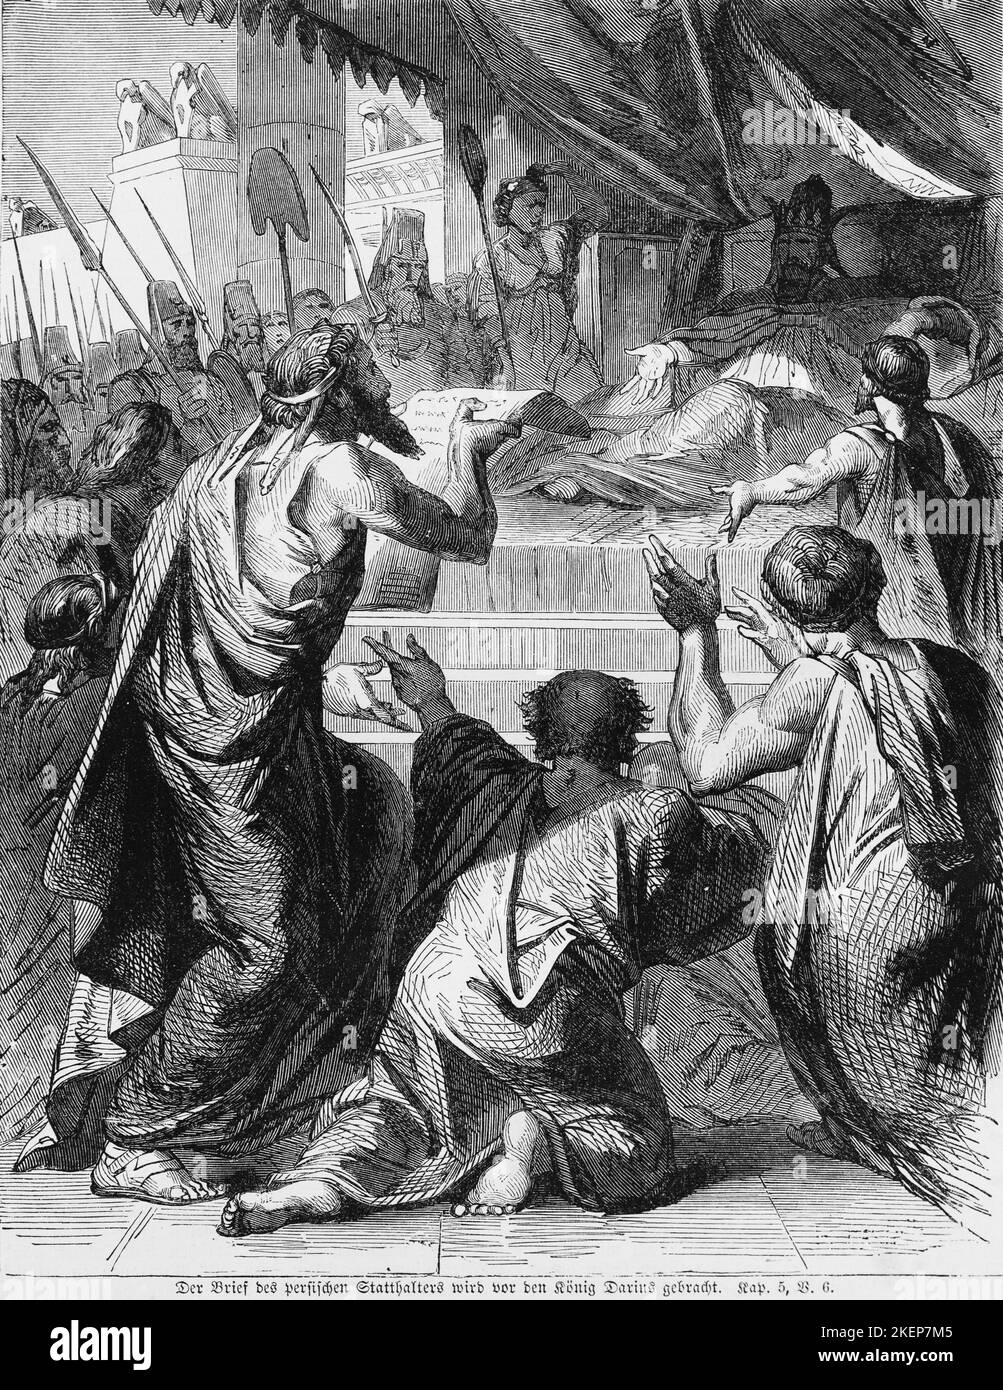 The letter of the Persian governor is brought in front of King Darius, Thathanai, Darium, Apharsach, governor, crowd, throne, letter, read, warriors Stock Photo